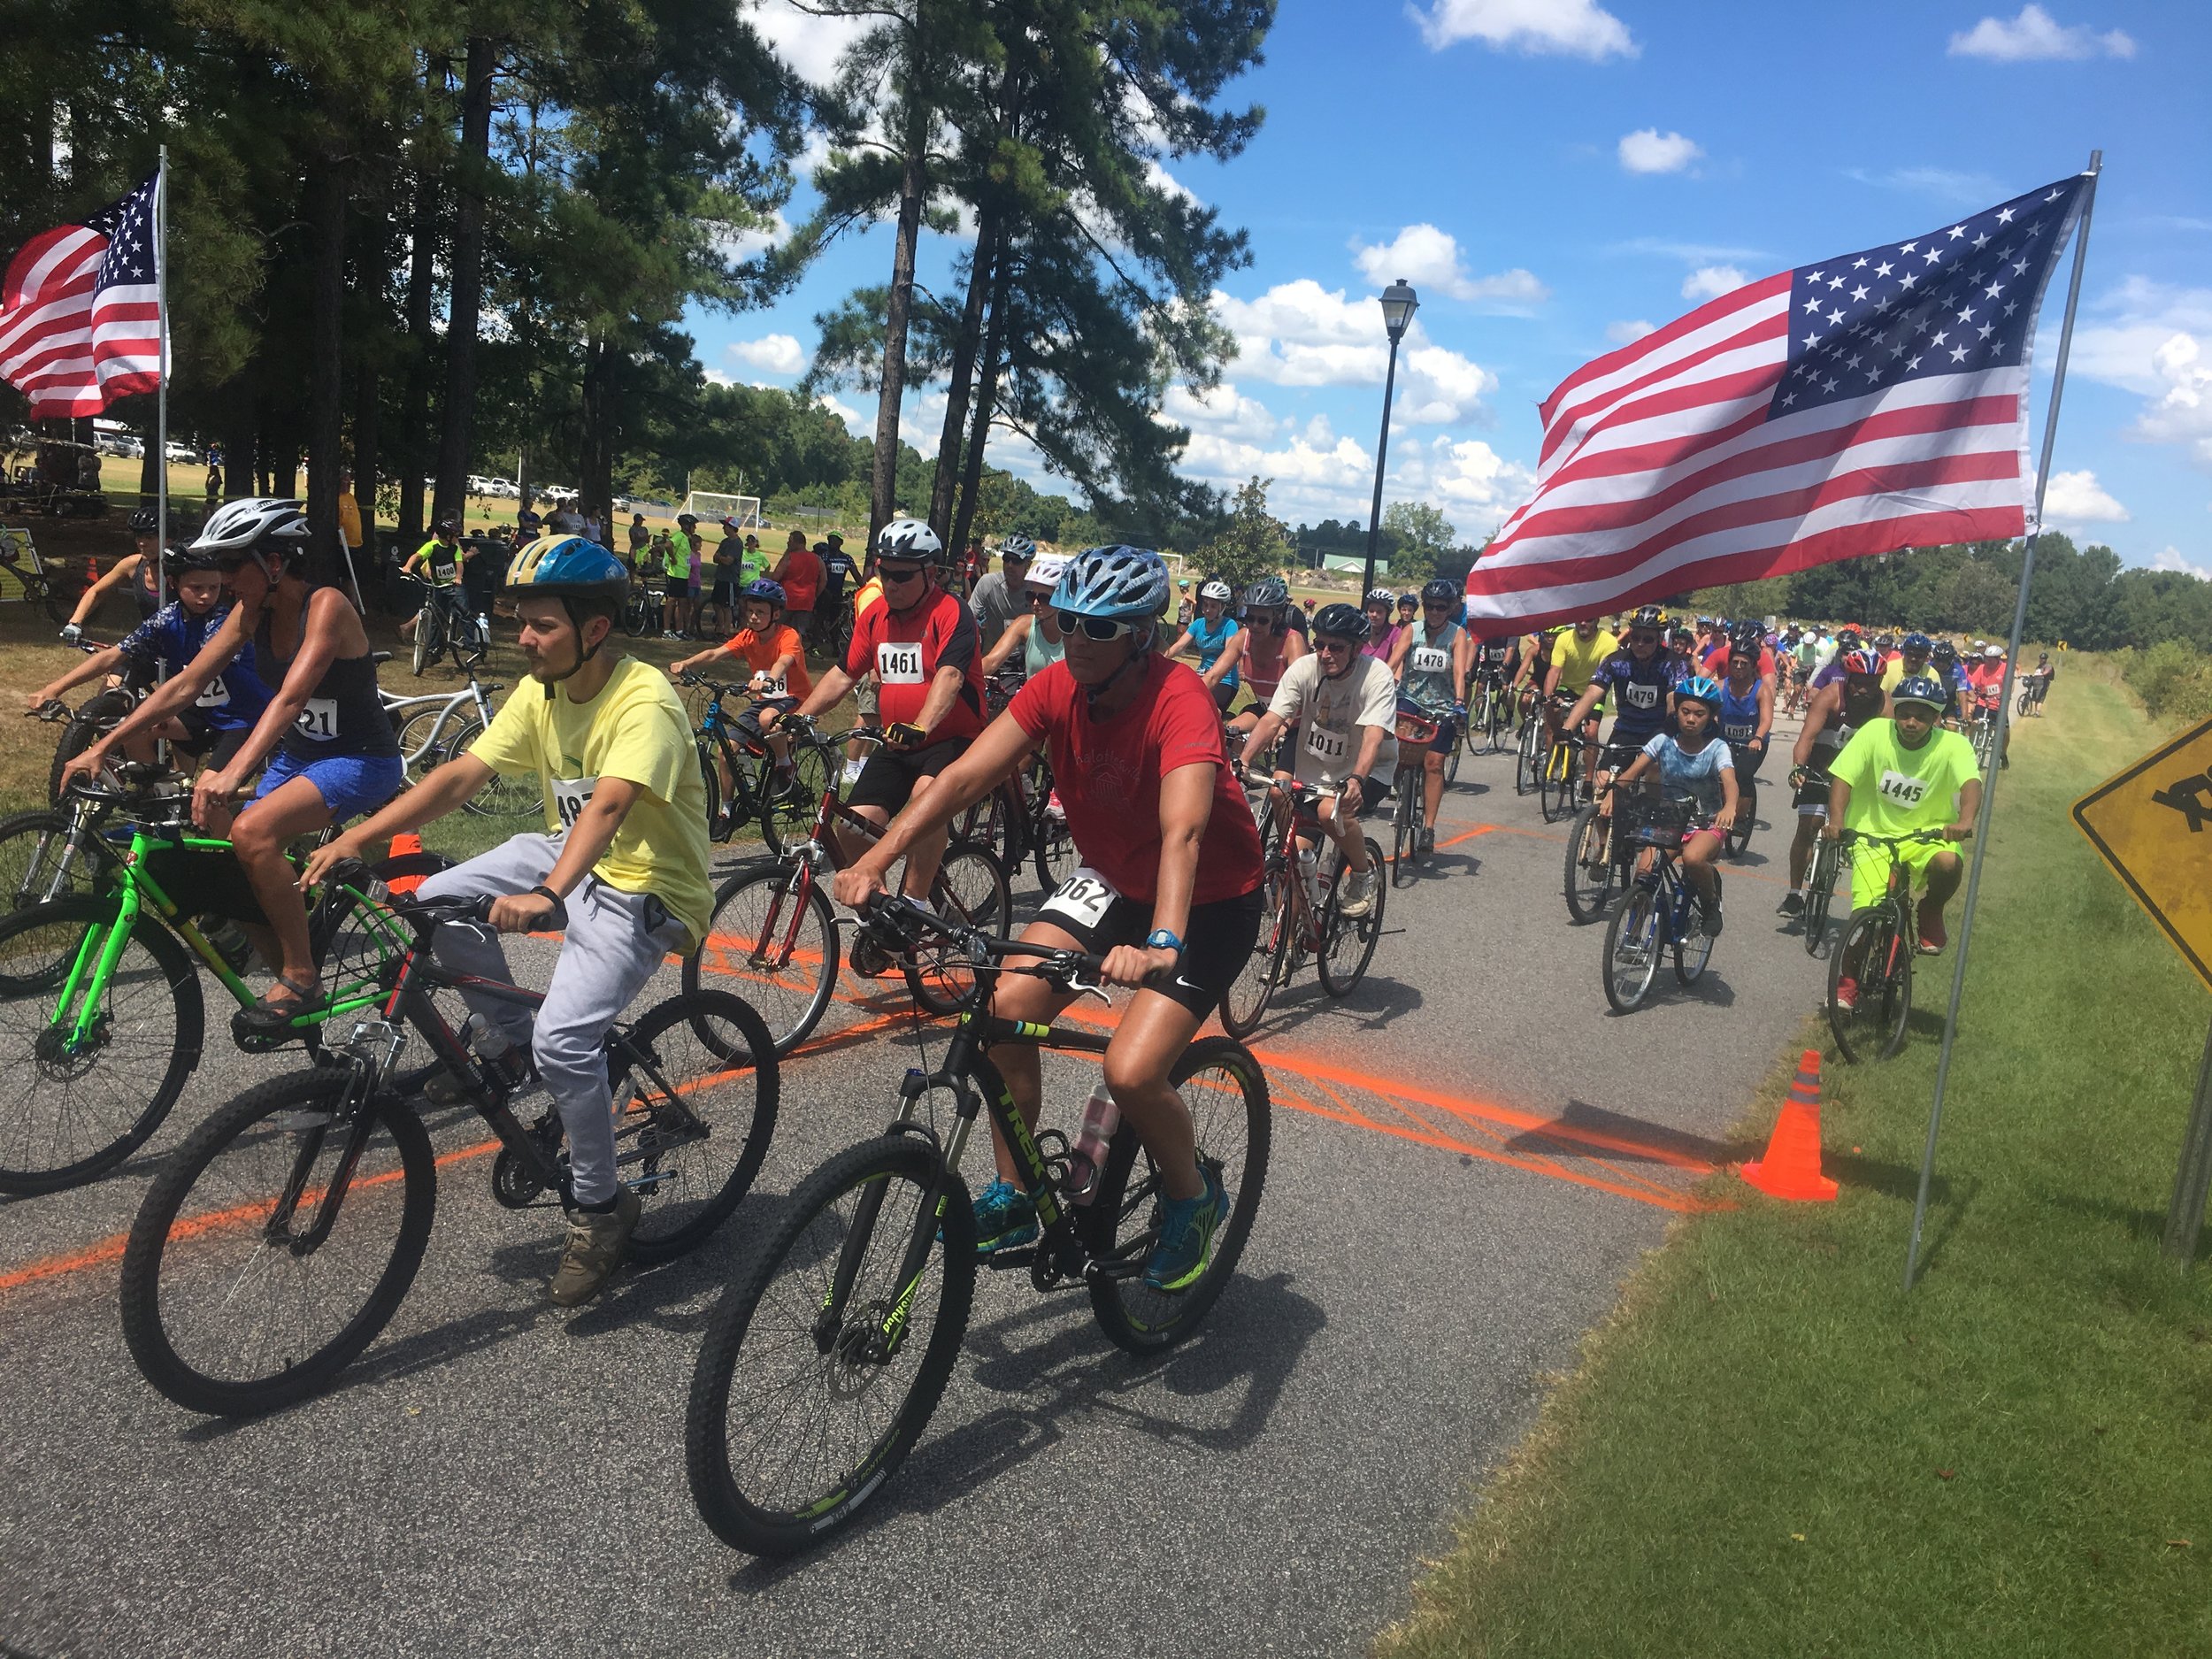 Bicycle events included the 16 mile personal endurance challenge around Lake Waccamaw and the 10K Family Bike.